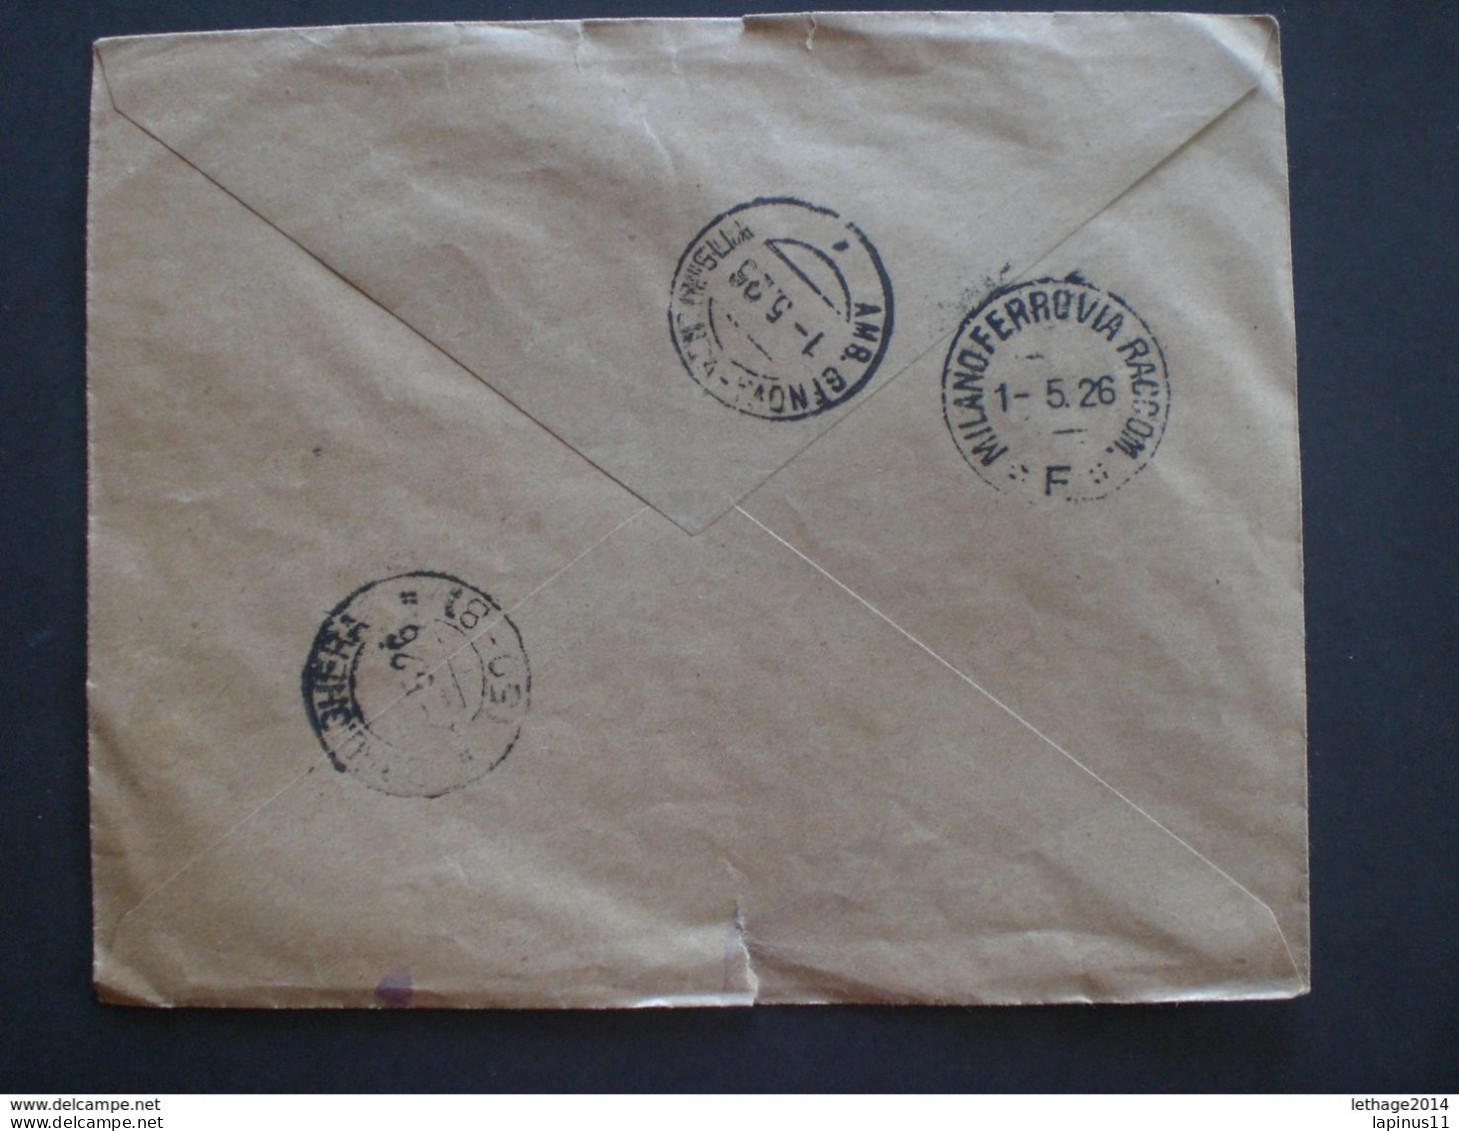 RUSSIA RUSSIE РОССИЯ STAMPS COVER 1923 Registered Mail RUSSIE TO ITALY RRR PERFORATED 12 RIF.TAGG. (8) - Covers & Documents